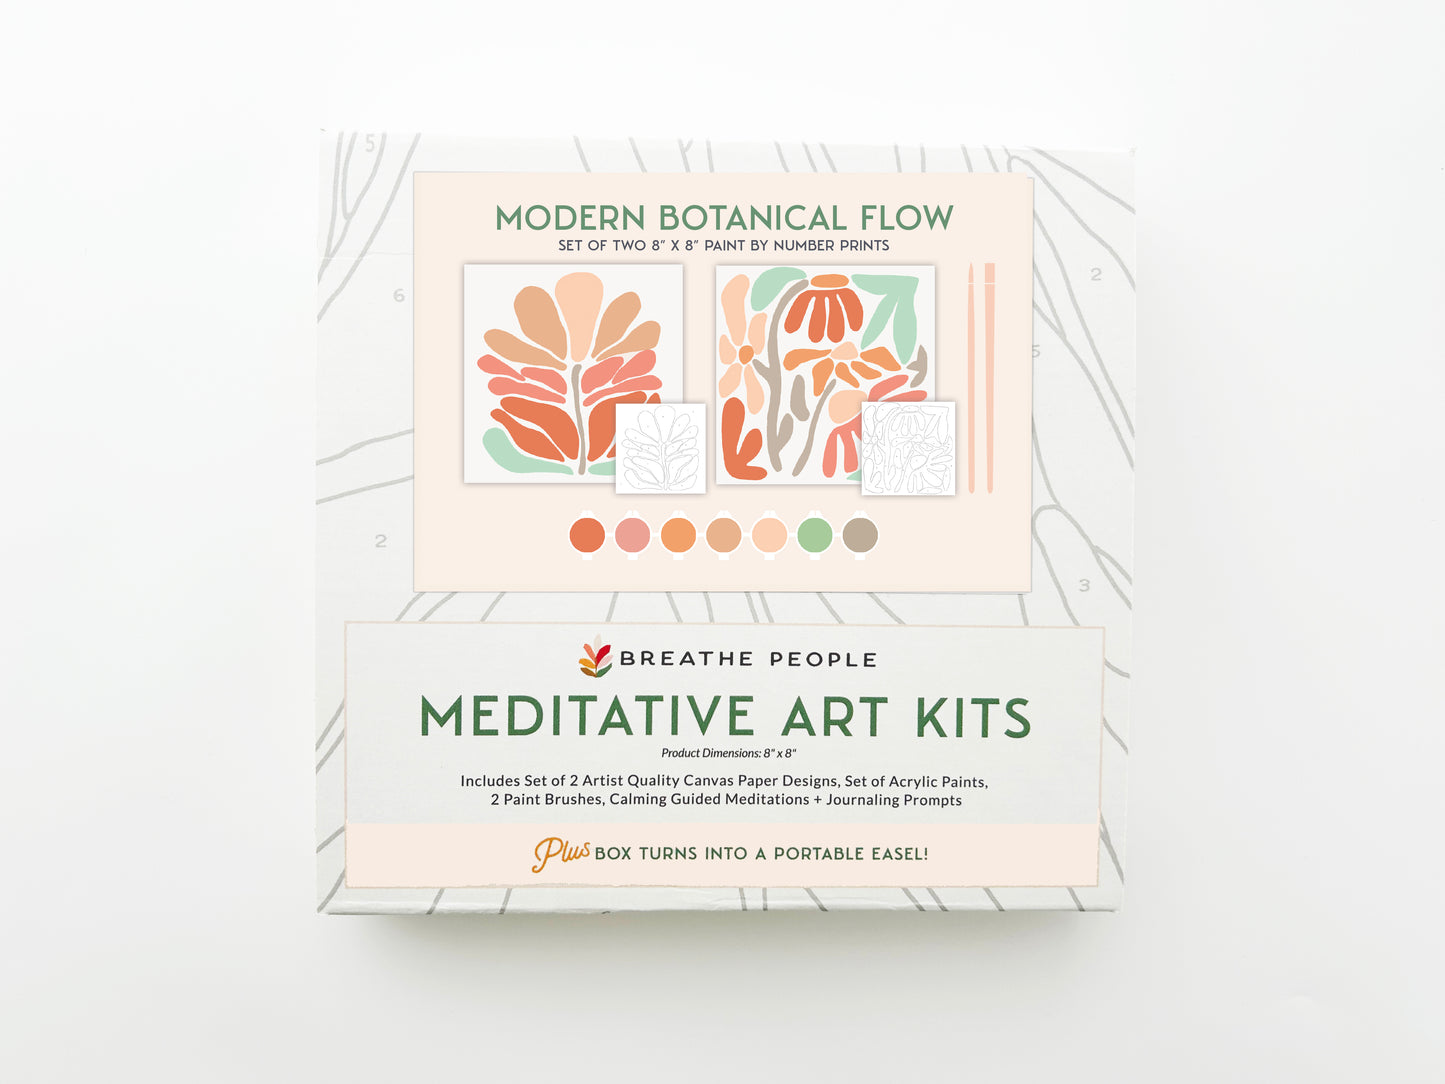 Modern Botanical Flow Paint by Numbers Kits